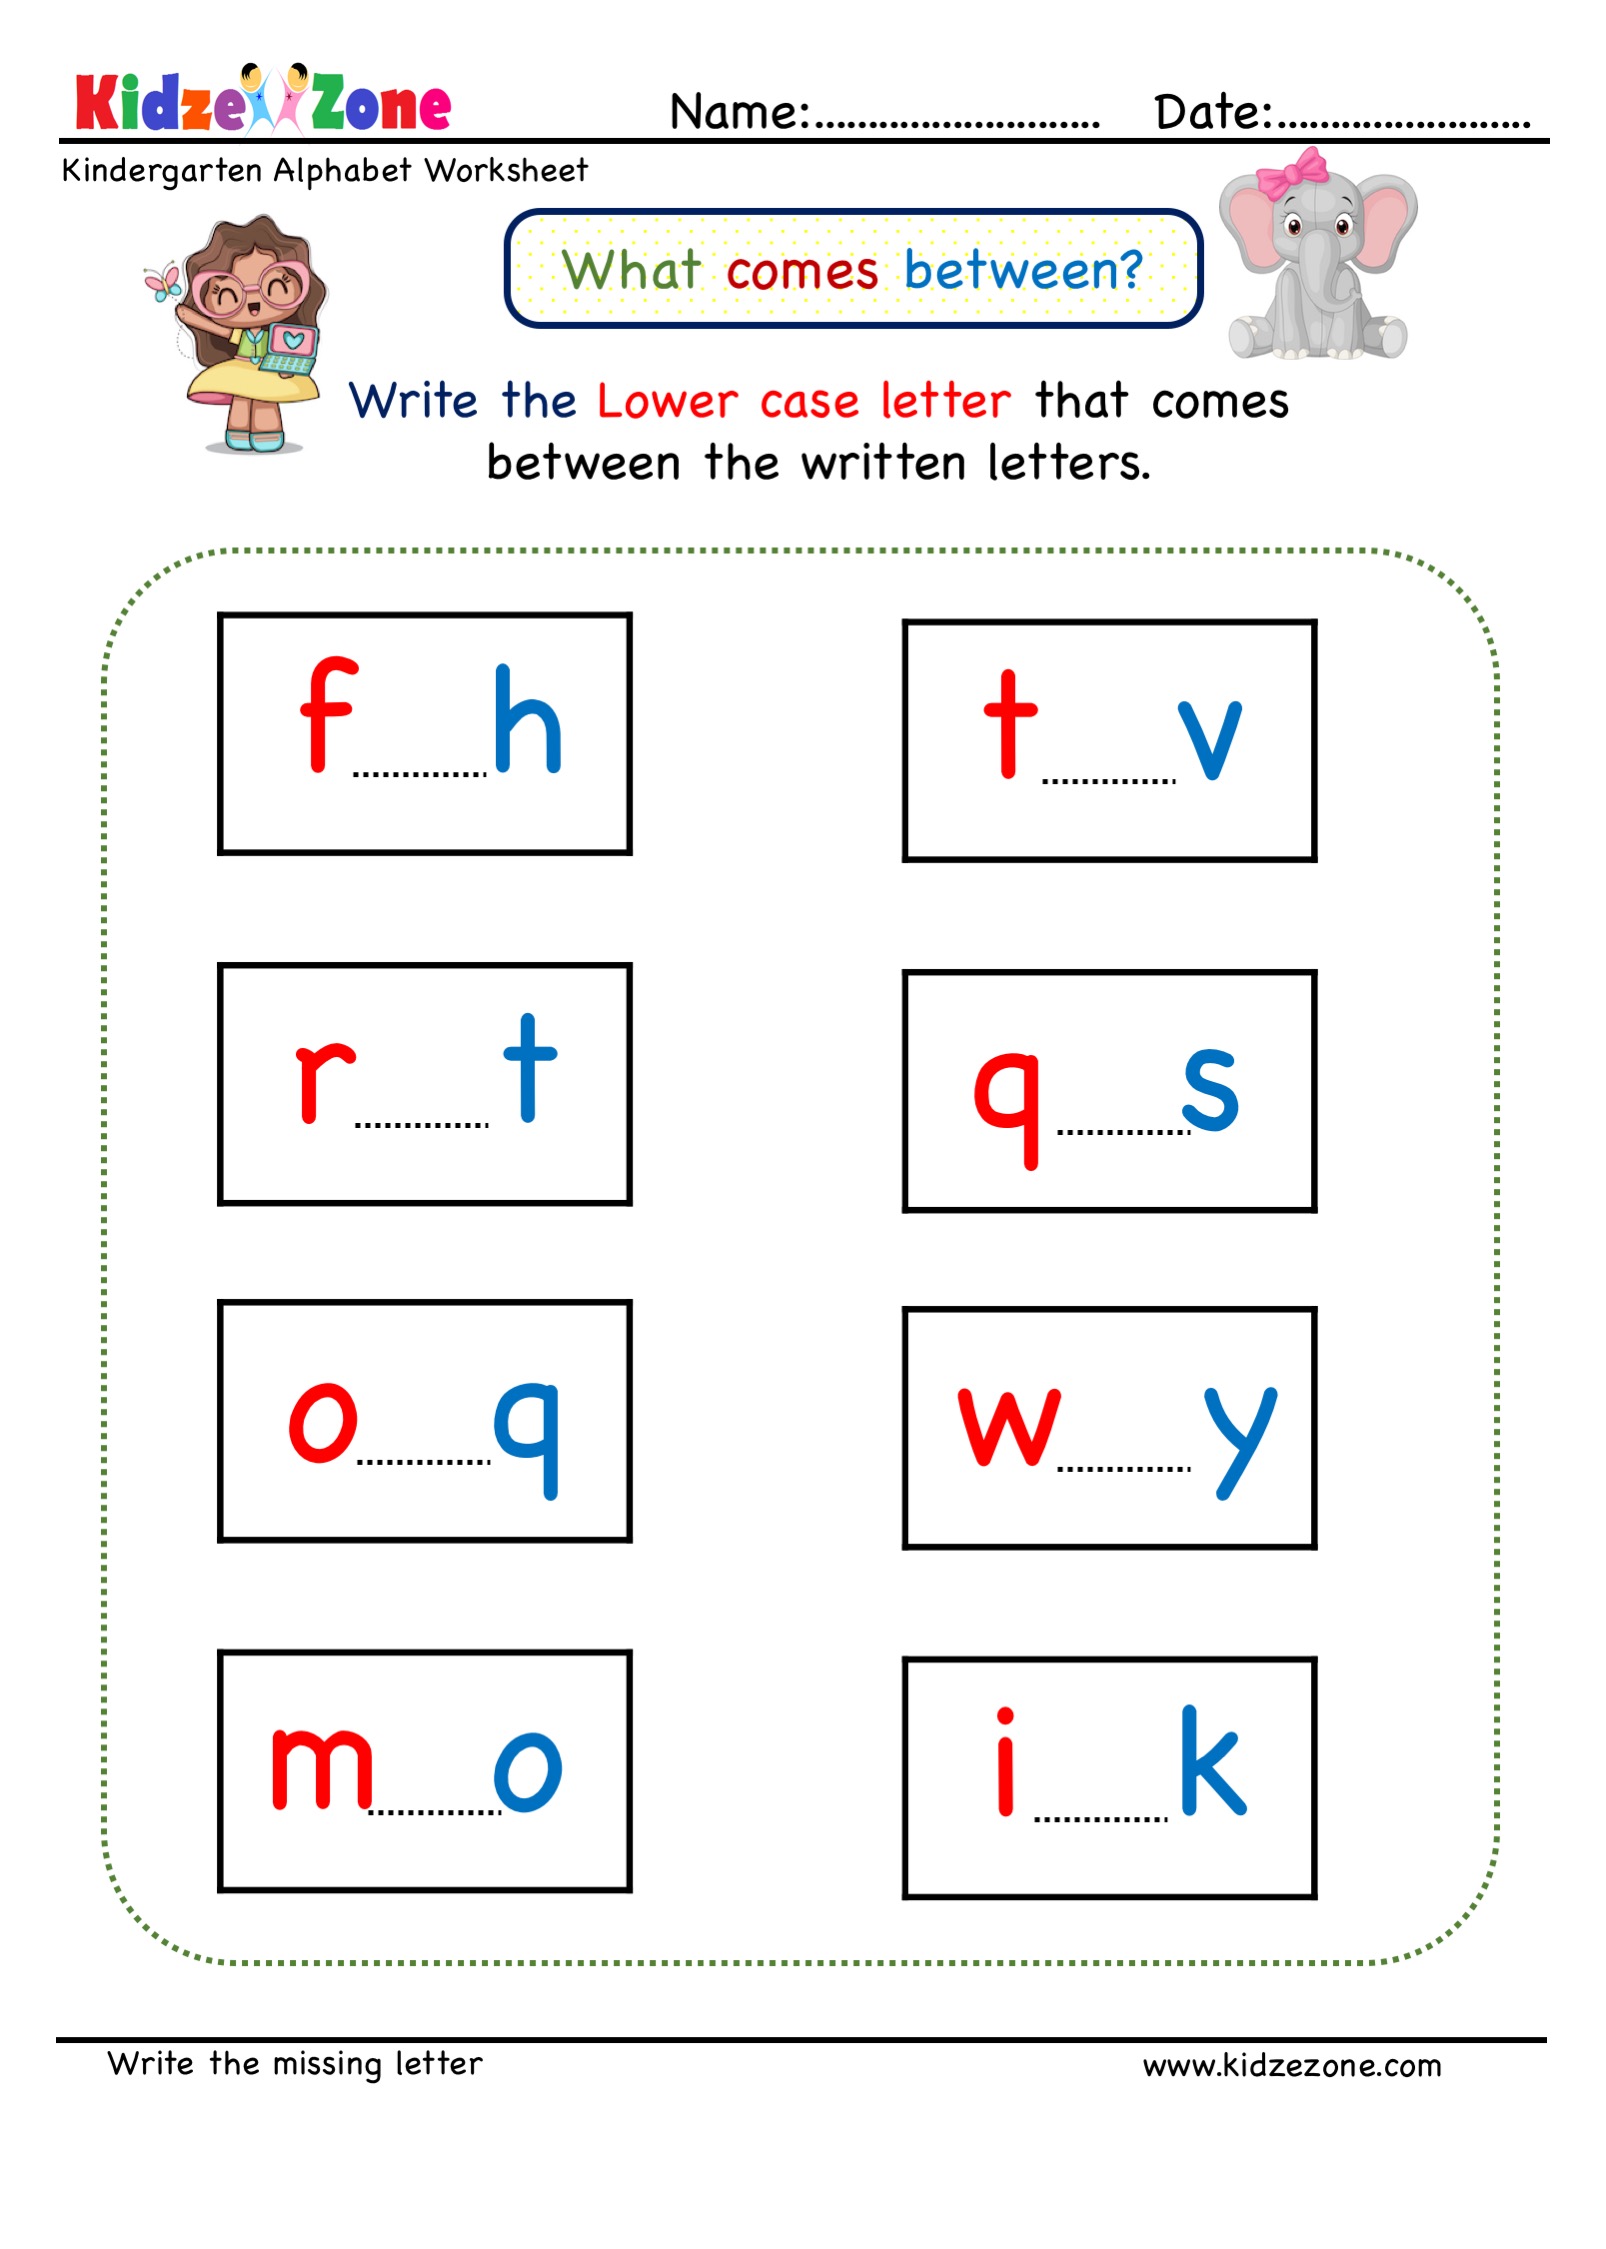 caterpillar-fill-in-the-missing-letters-alphabet-worksheets-itsy